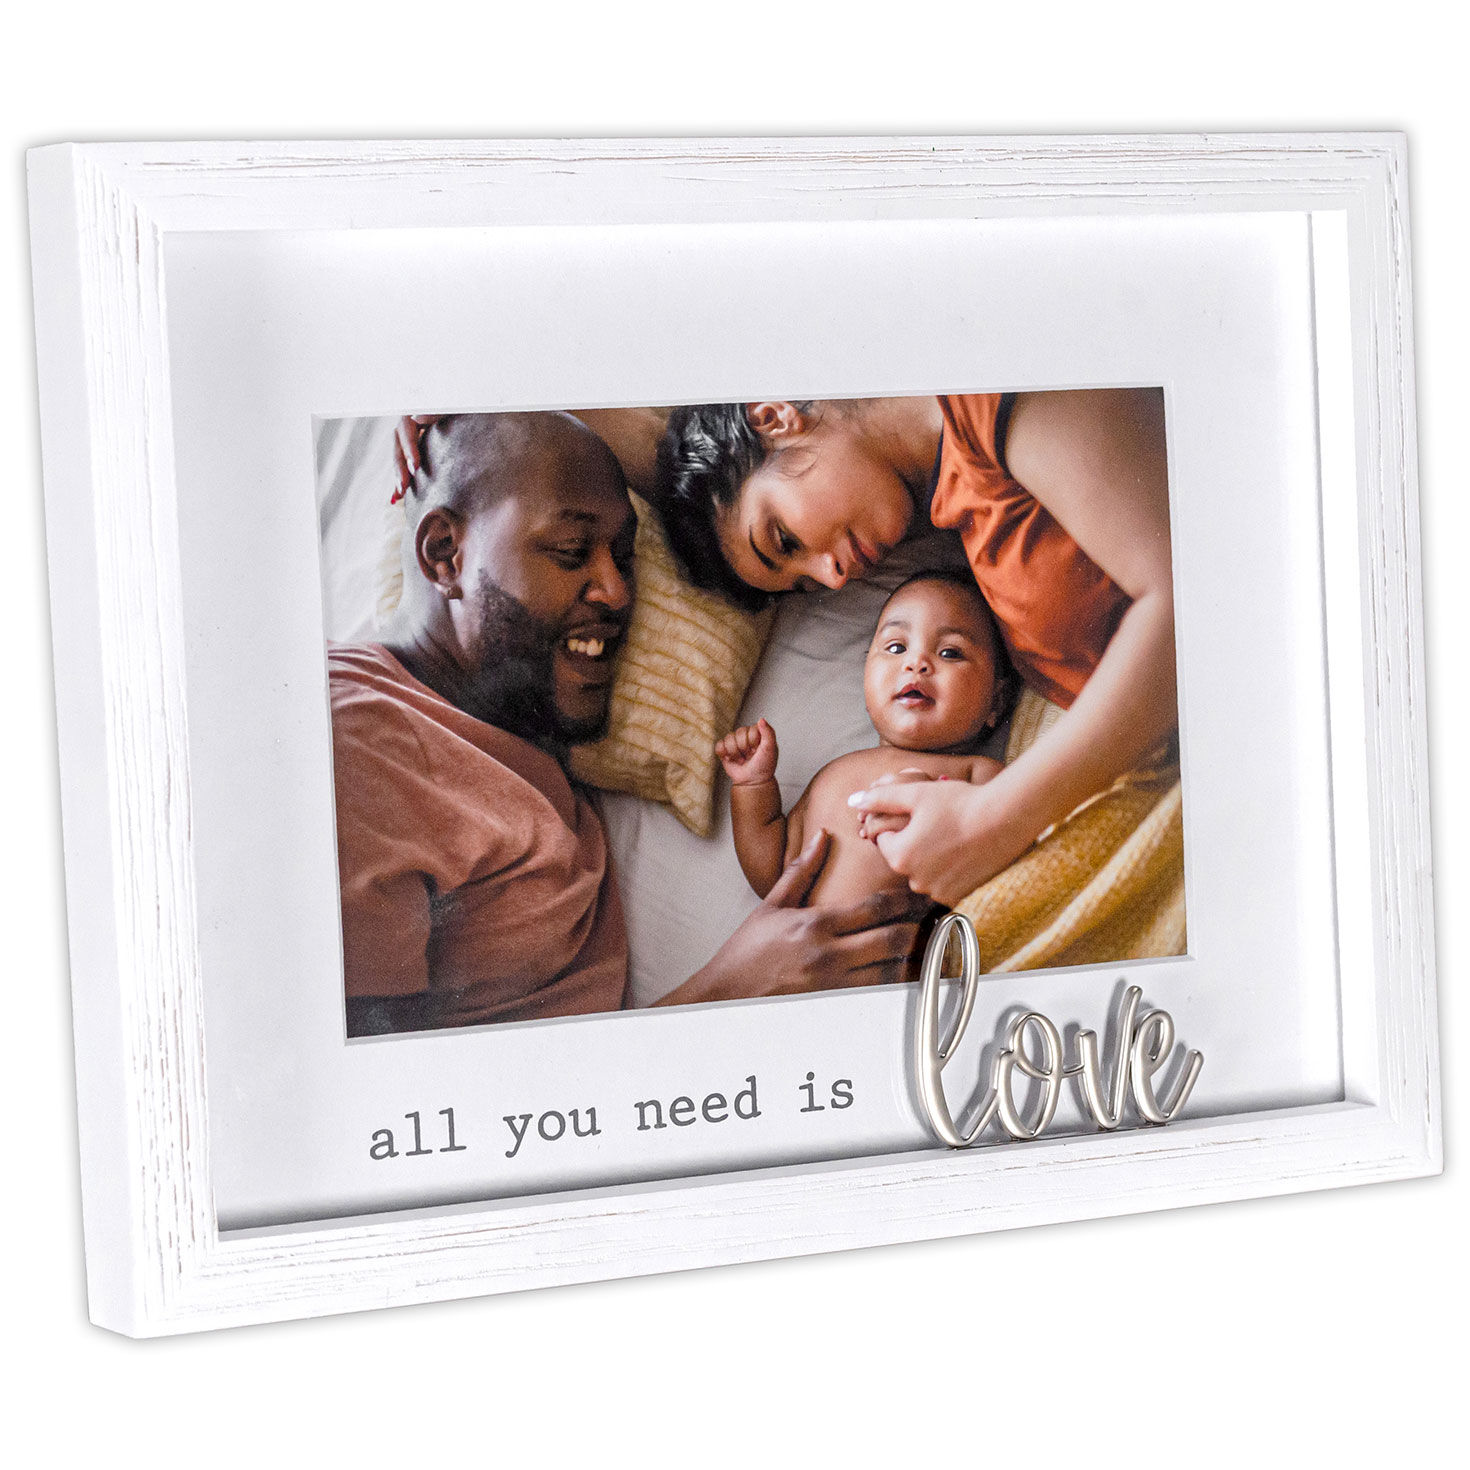 https://www.hallmark.com/dw/image/v2/AALB_PRD/on/demandware.static/-/Sites-hallmark-master/default/dw73d64fc7/images/finished-goods/products/1029346/All-You-Need-is-Love-White-Wood-Picture-Frame_1029346_01.jpg?sfrm=jpg